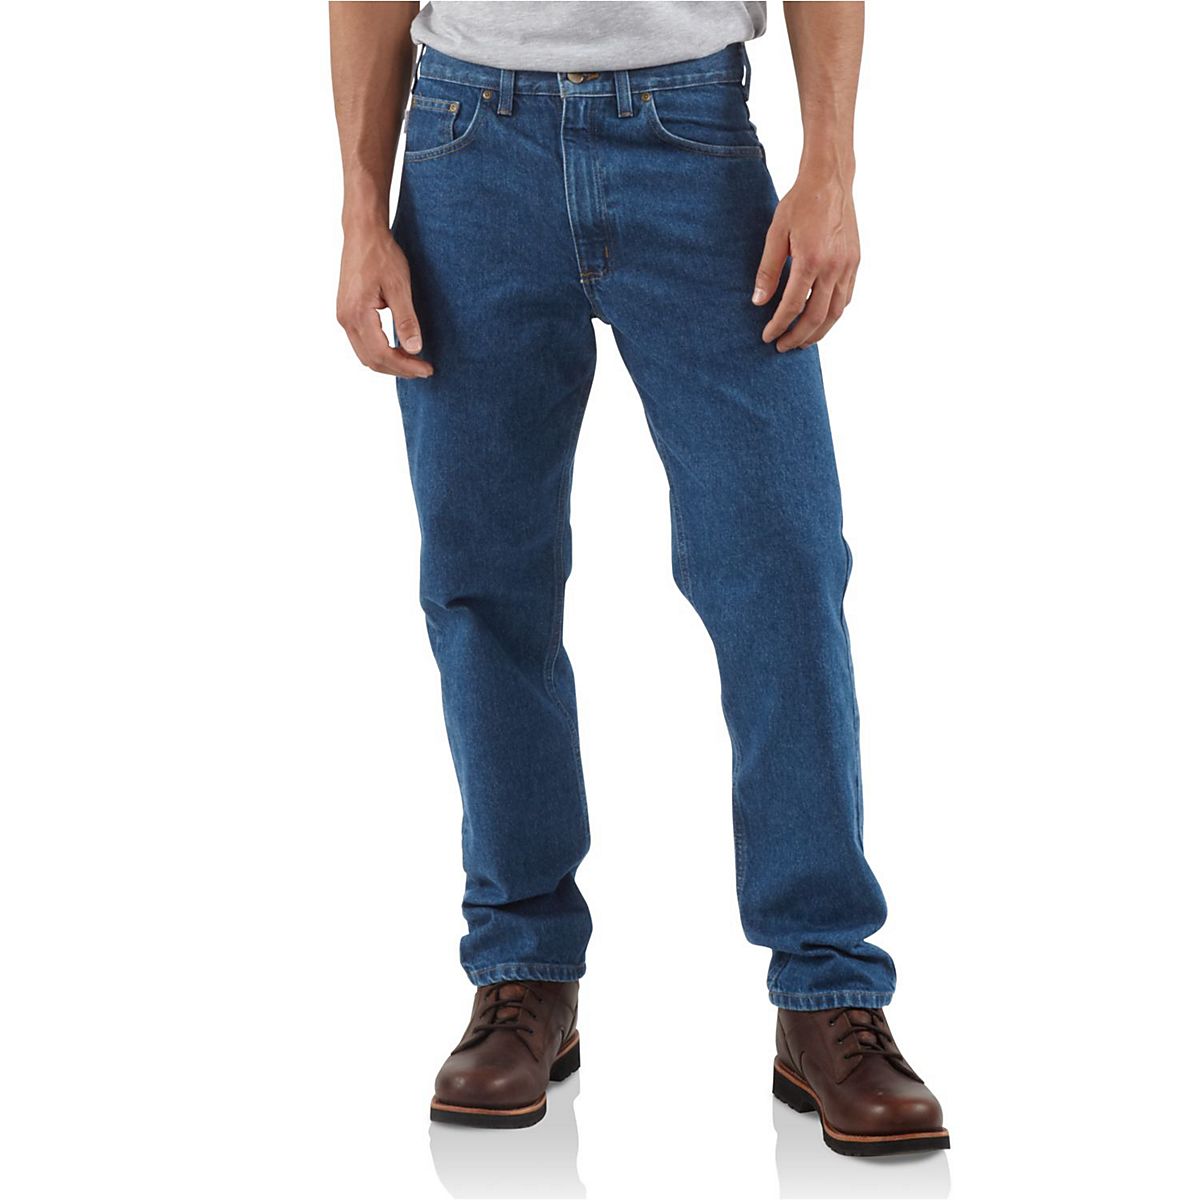 Carhartt Men's Traditional Fit Jean | Free Shipping at Academy